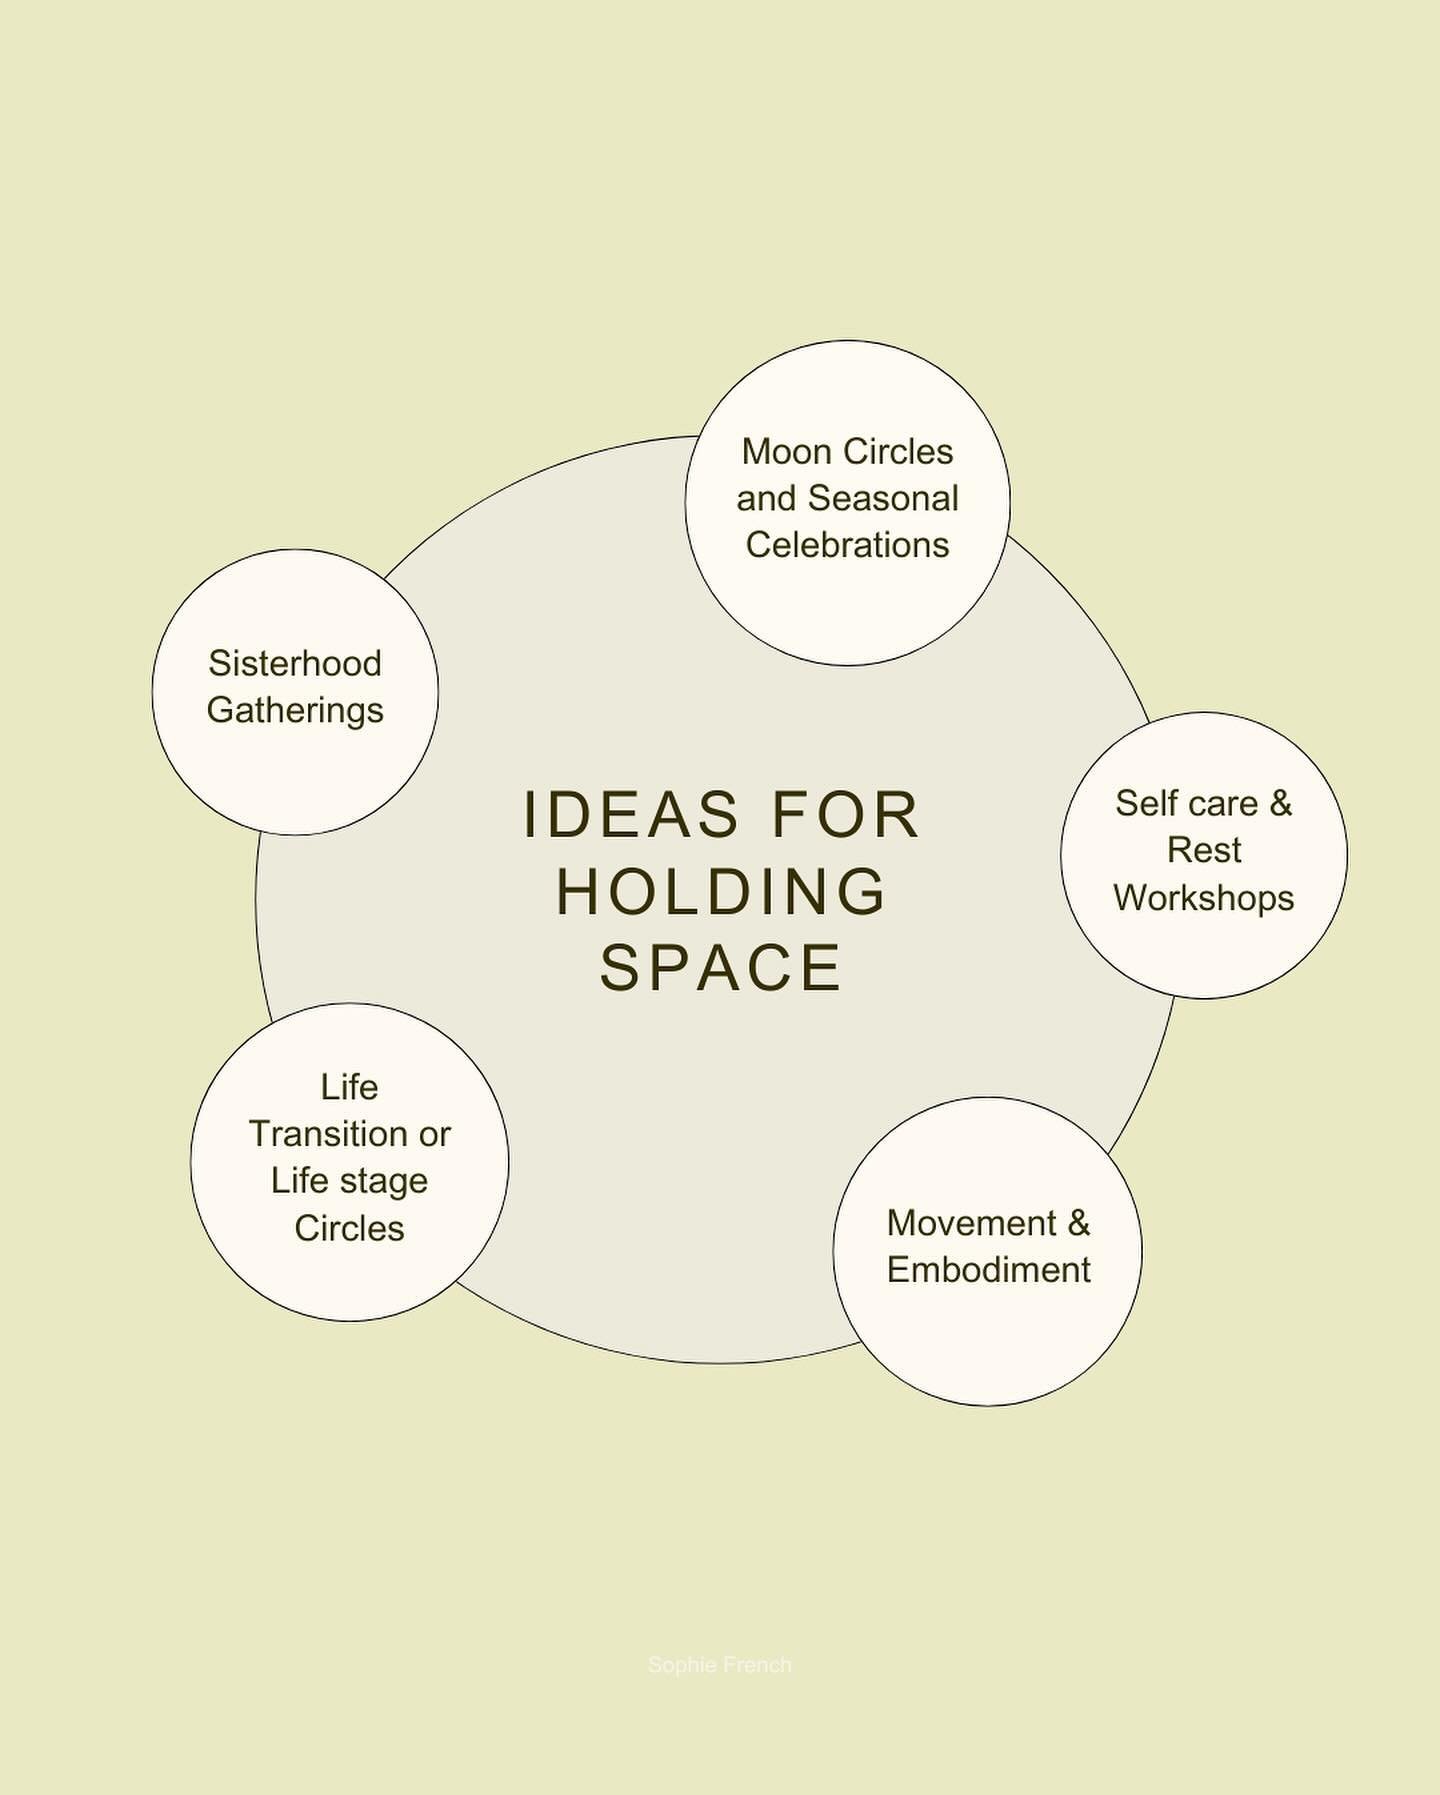 Whether you&rsquo;re a creative, mother, embodiment coach, astrologer, artist, doula, neuroscience expert, florist, cook or reiki healer, your passions form THE foundation for [holding space] in circles &amp; workshops, online or in person.

Imagine 